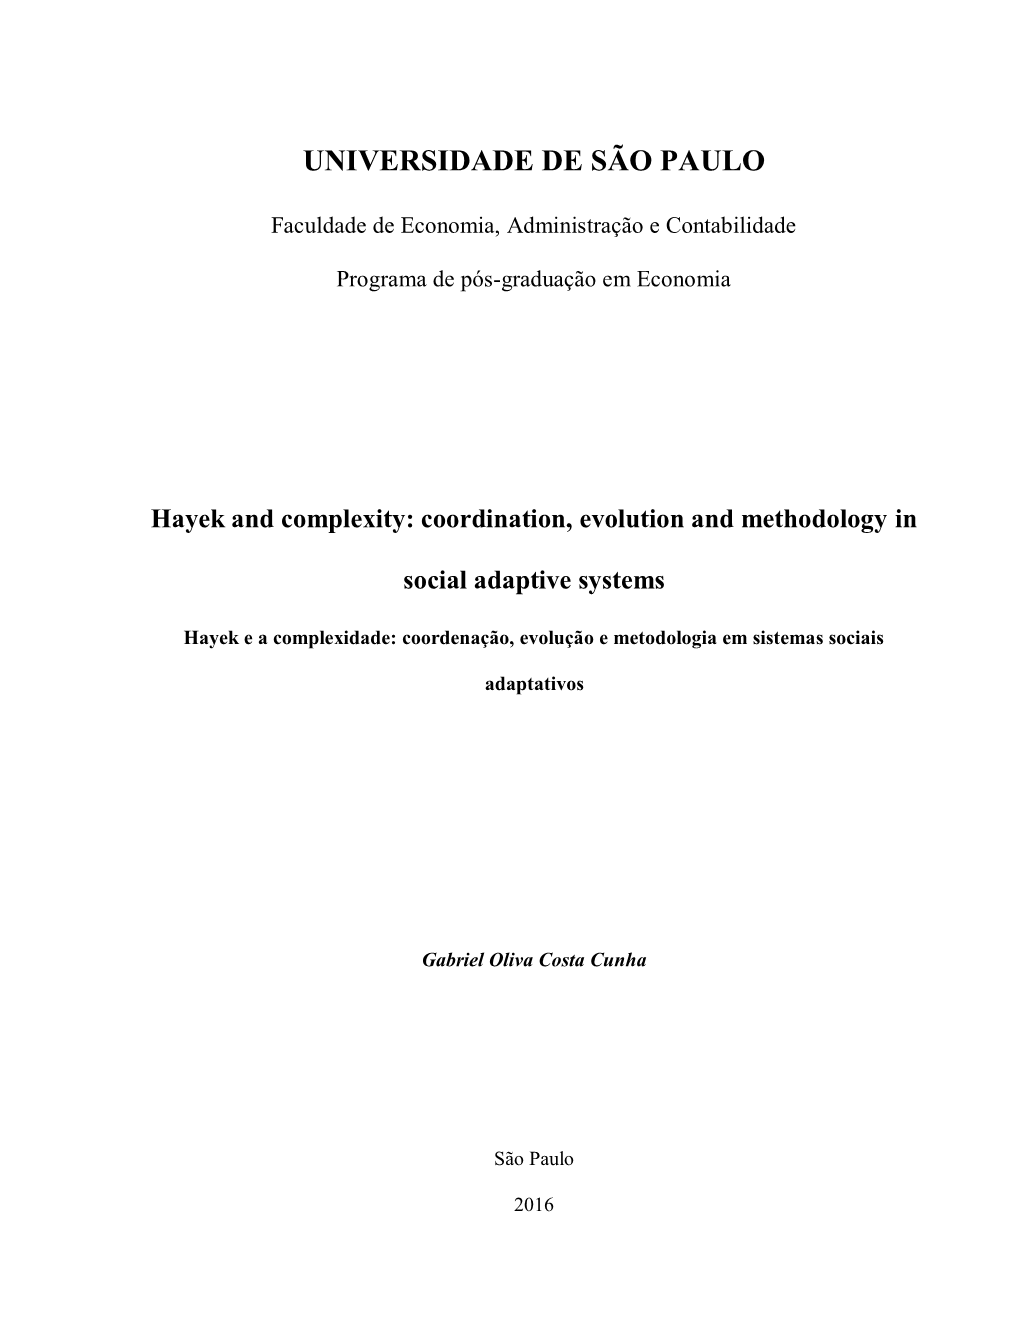 Hayek and Complexity: Coordination, Evolution and Methodology In